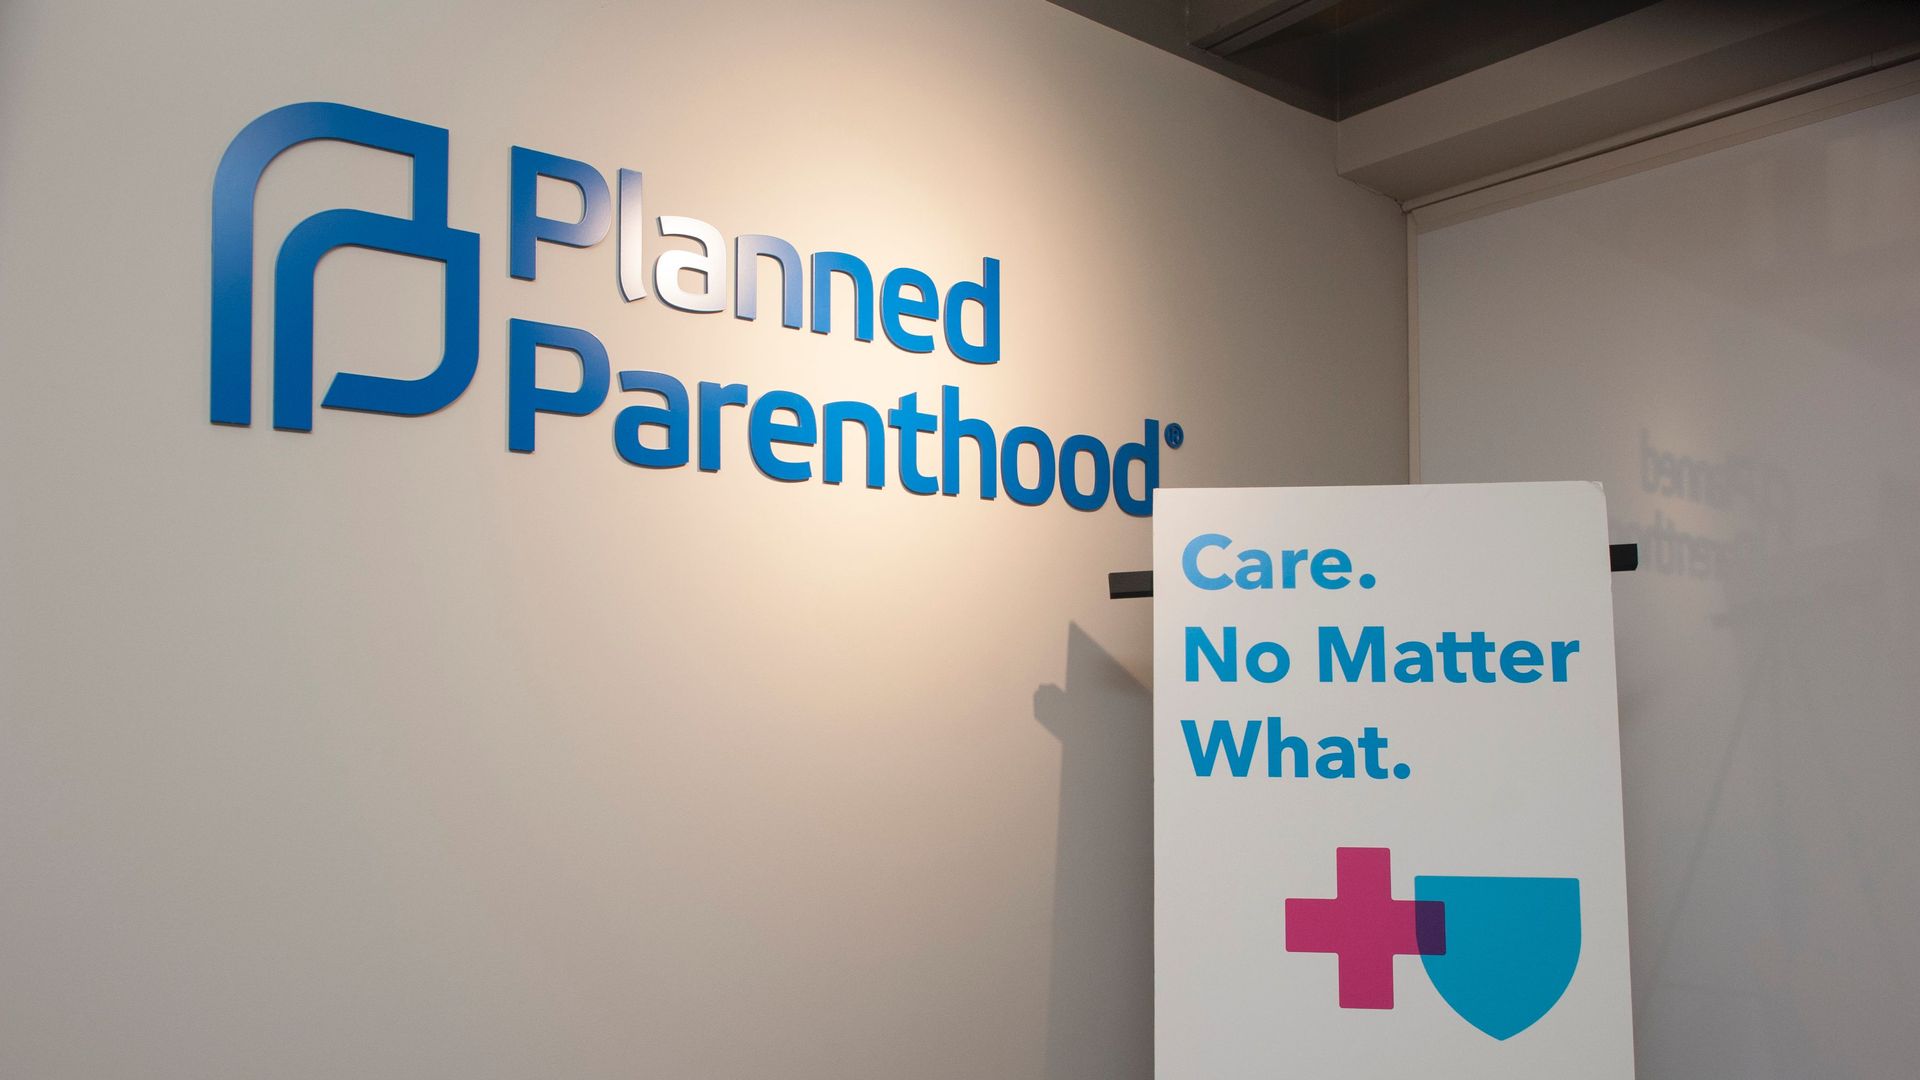 Photo of a wall with the Planned Parenthood logo and a sign that says "Care. No Matter What."